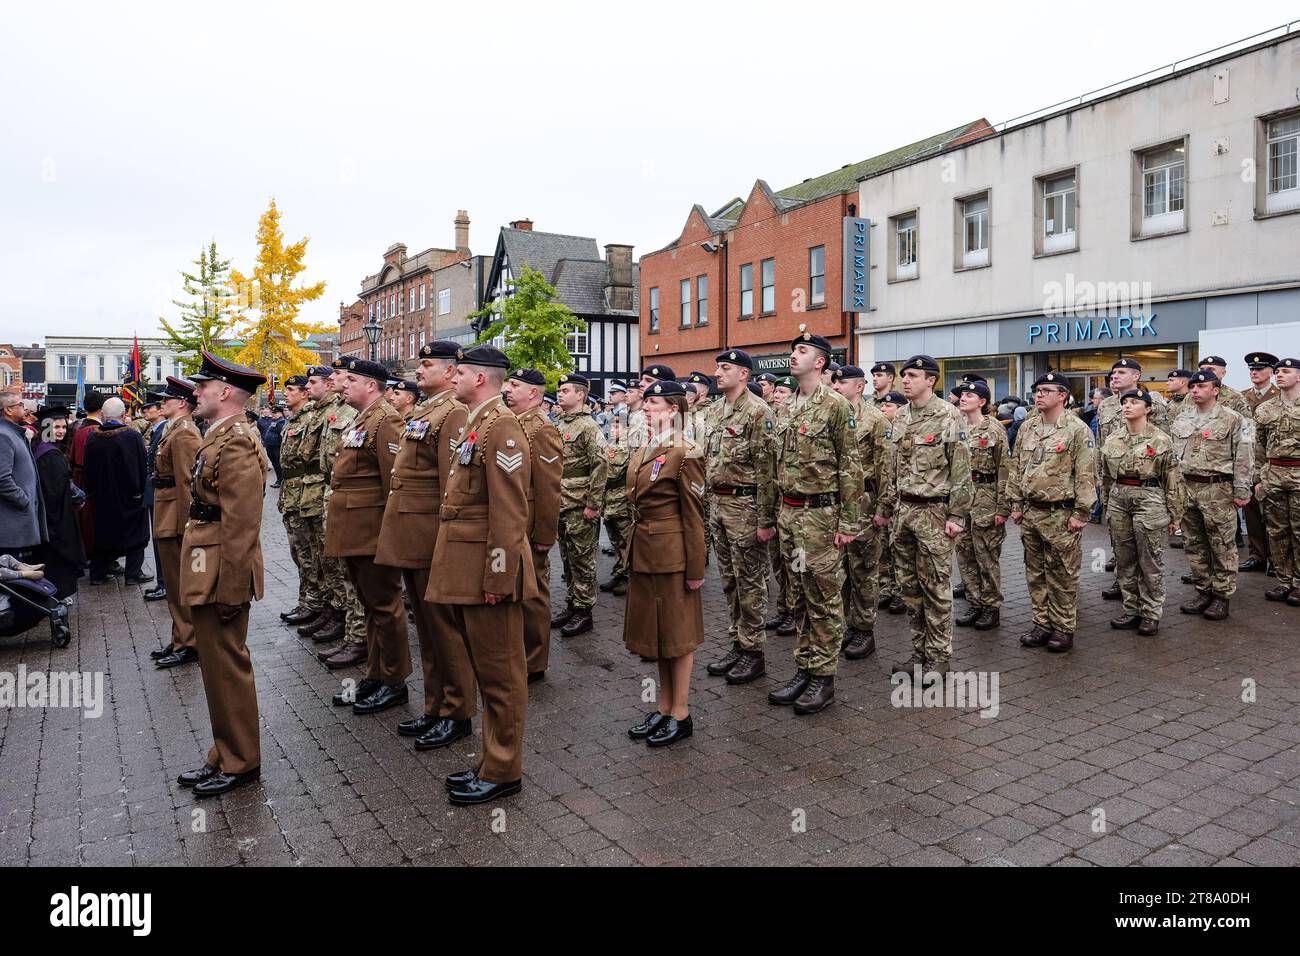 soldiers in loughborough town centre on remembrance day Stock Photo